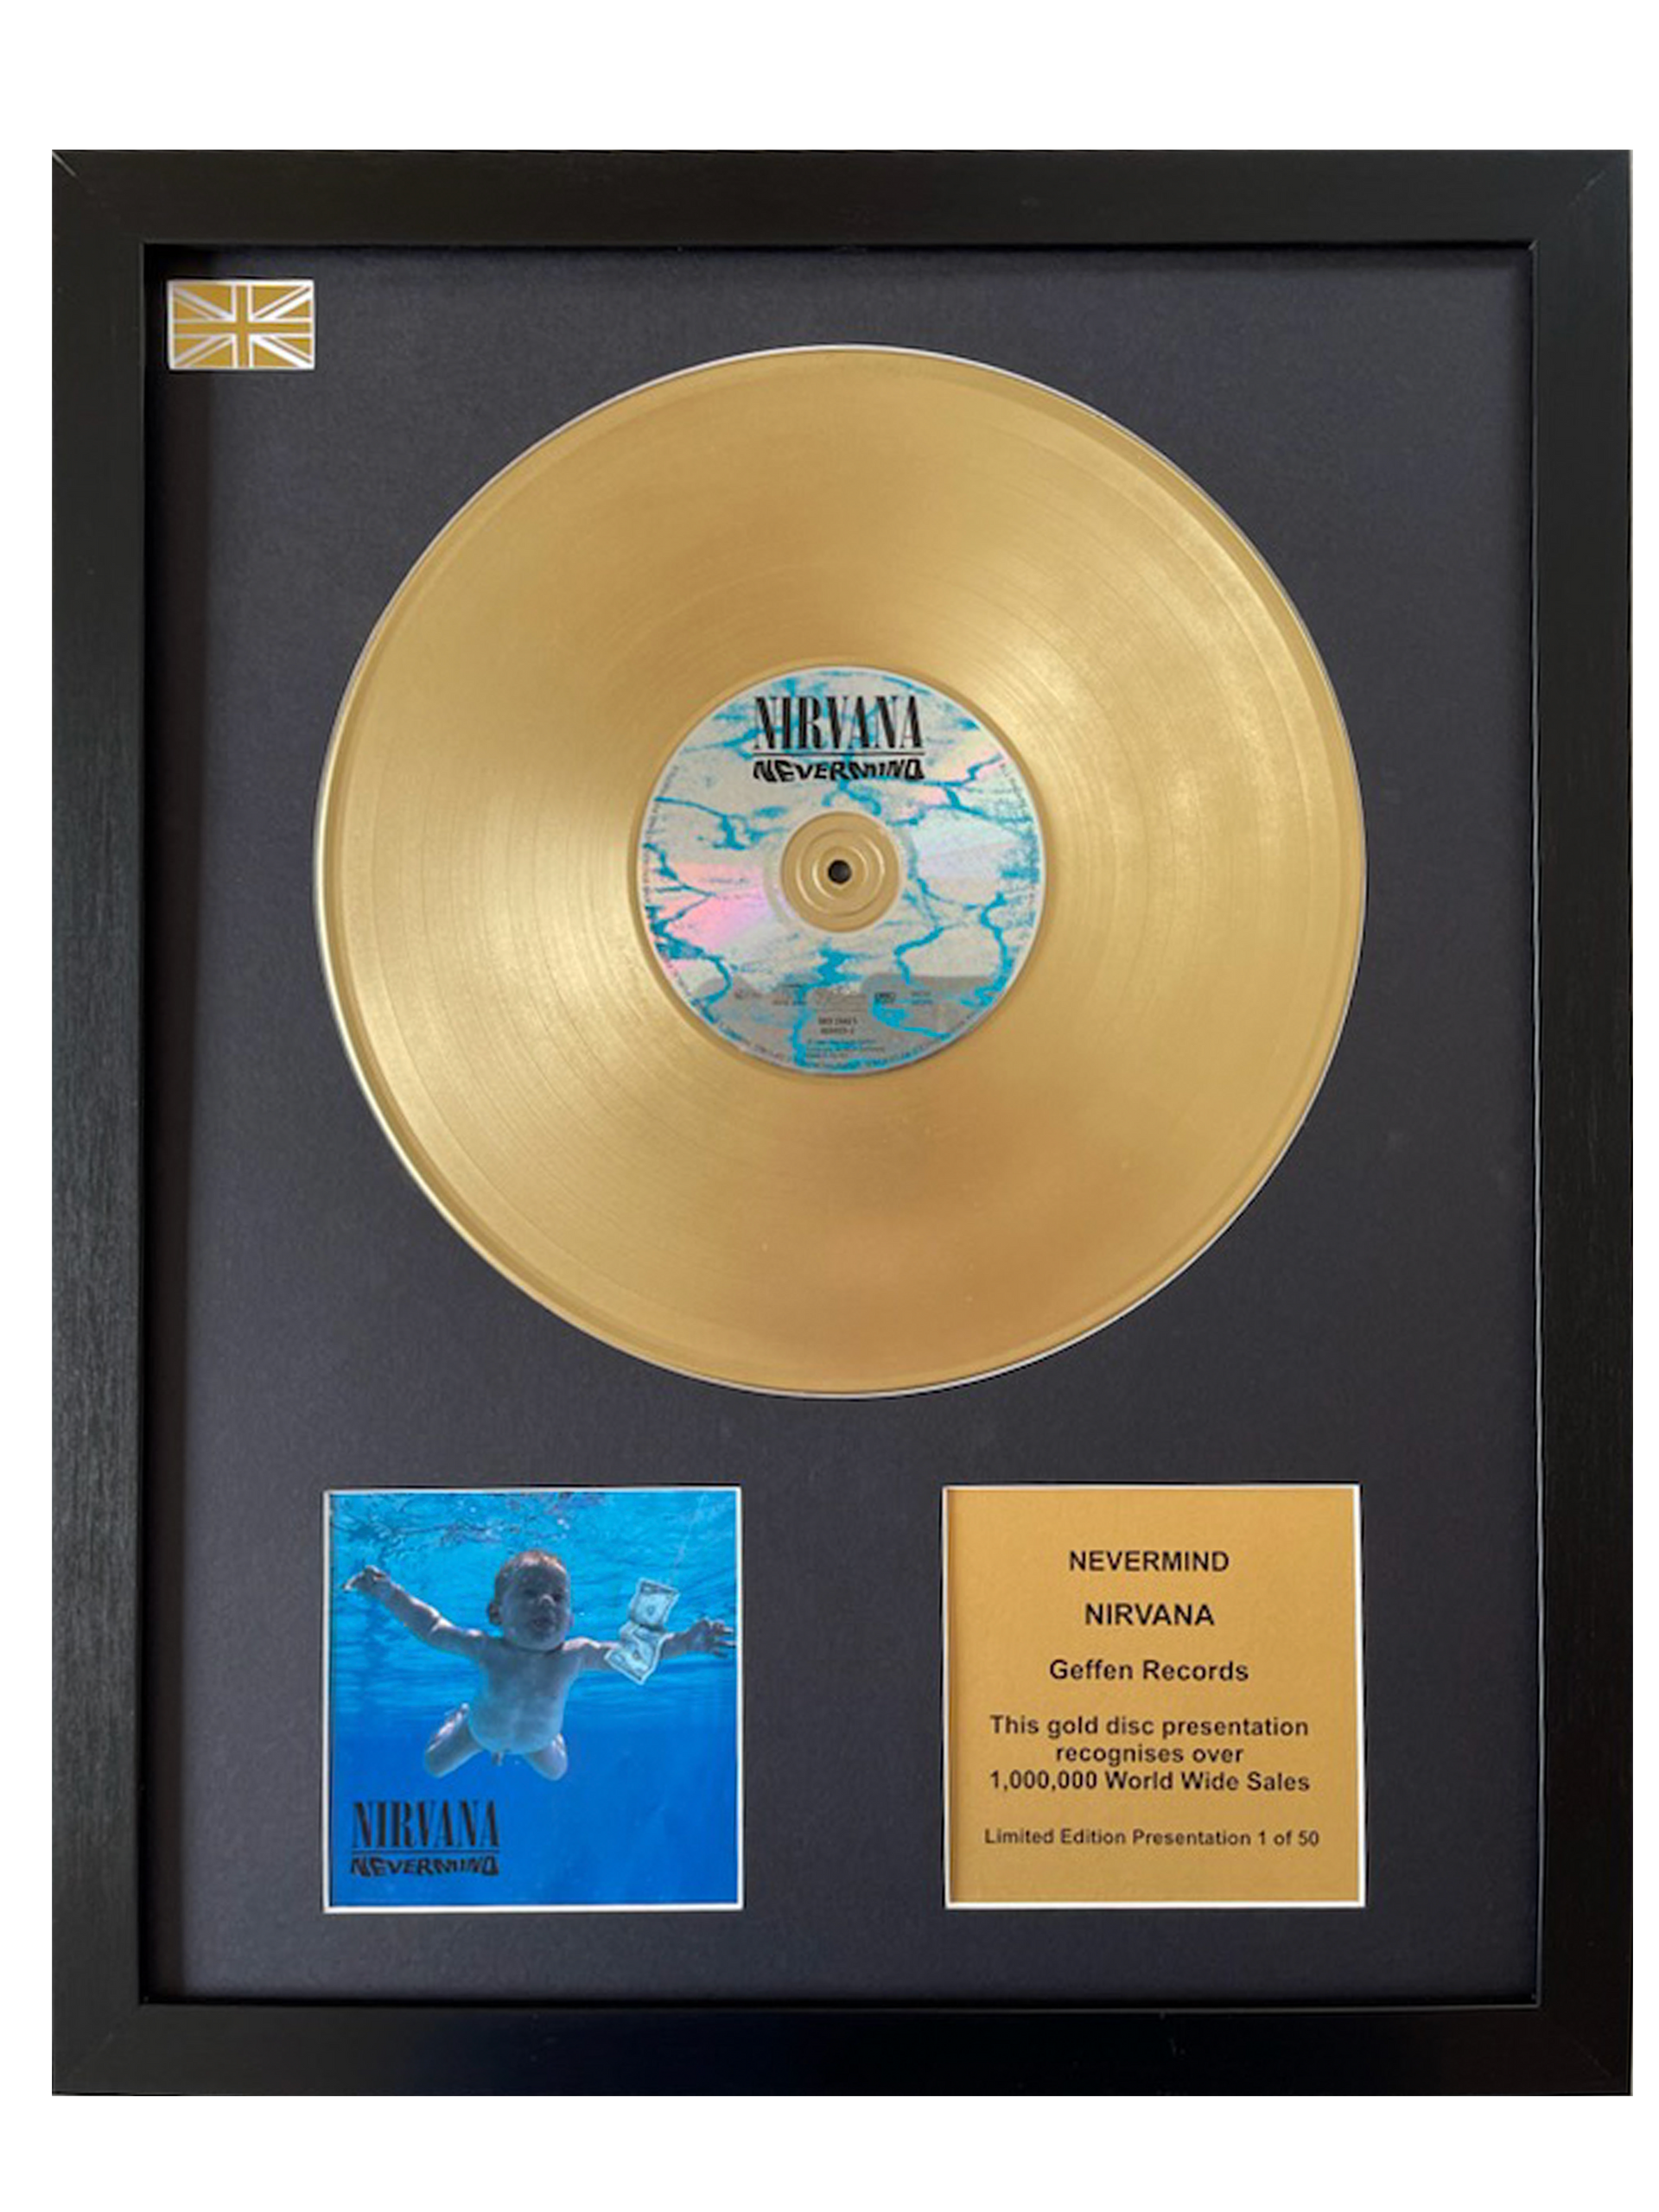 NIRVANA - Nevermind - Gold Disc – The Gold Record Company